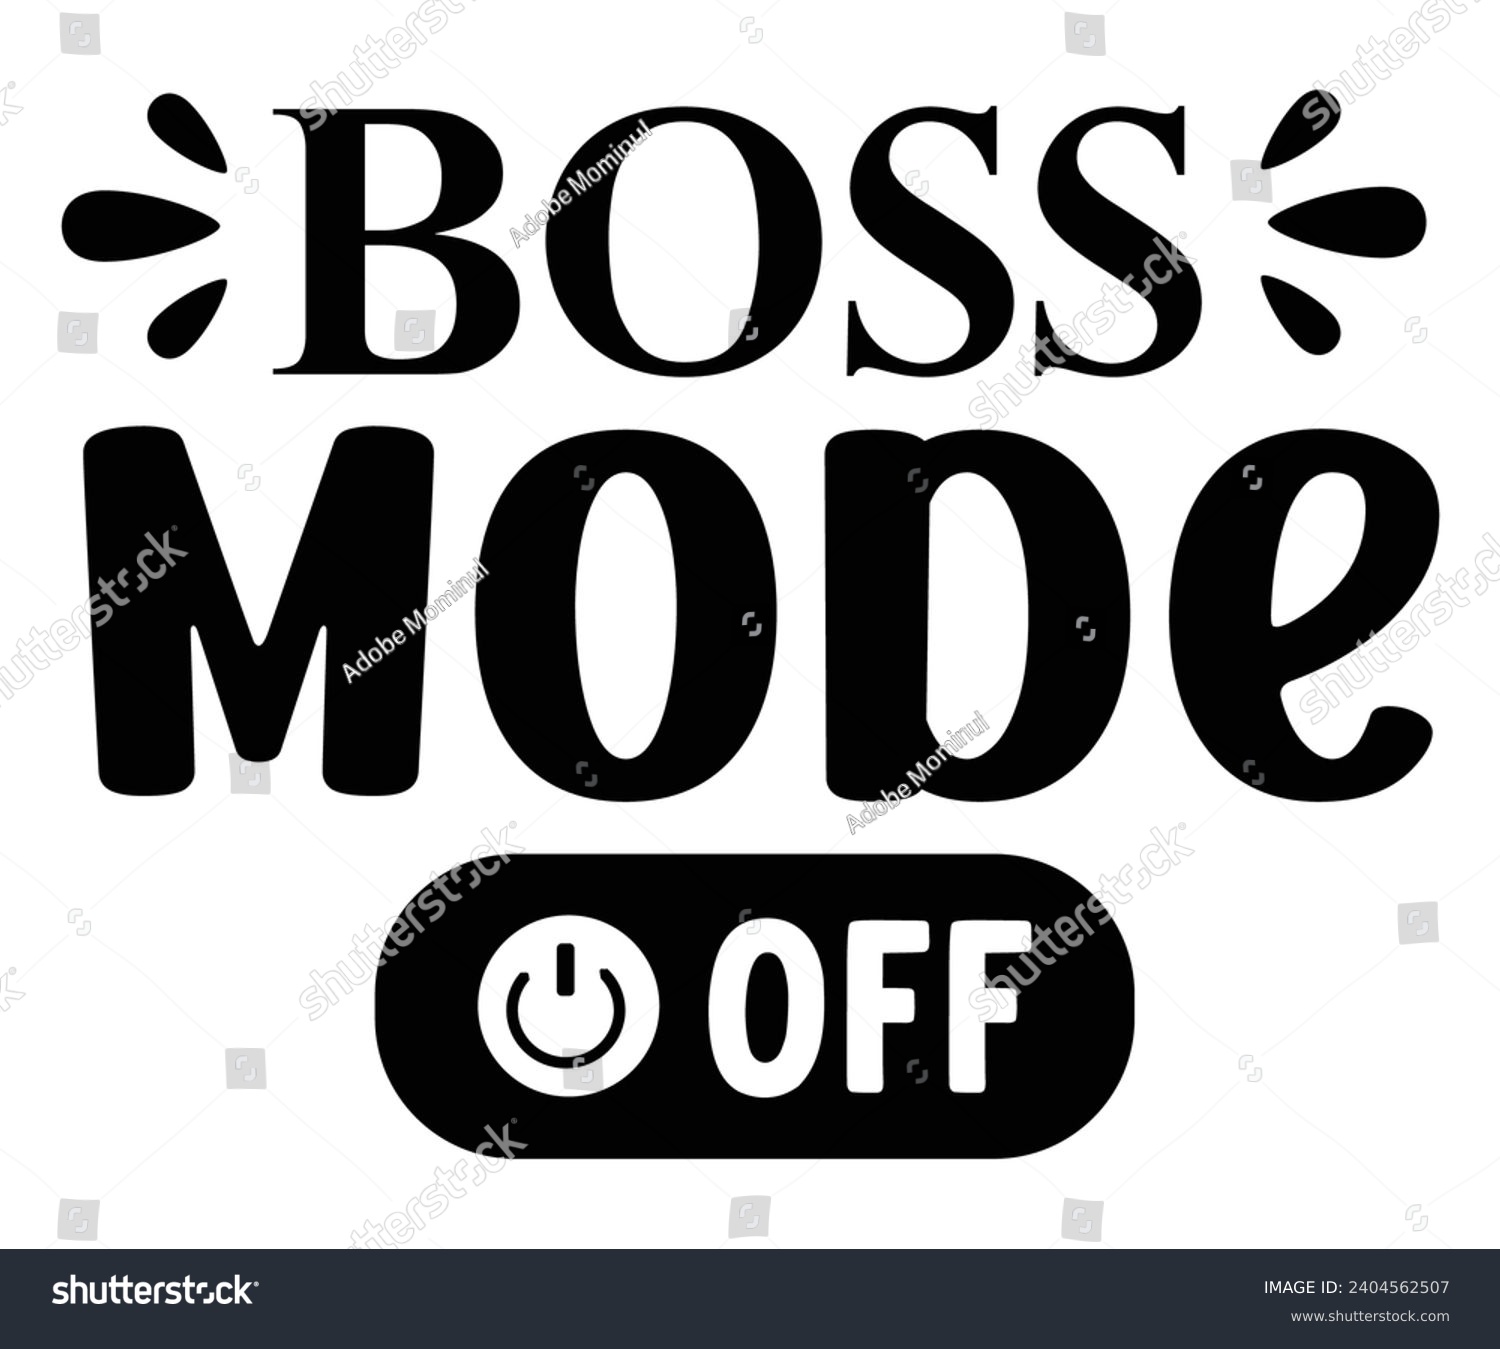 SVG of Boss Mode Off Svg,Happy Boss Day svg,Boss Saying Quotes,Boss Day T-shirt,Gift for Boss,Great Jobs,Happy Bosses Day t-shirt,Girl Boss Shirt,Motivational Boss,Cut File,Circut And Silhouette,Commercial  svg